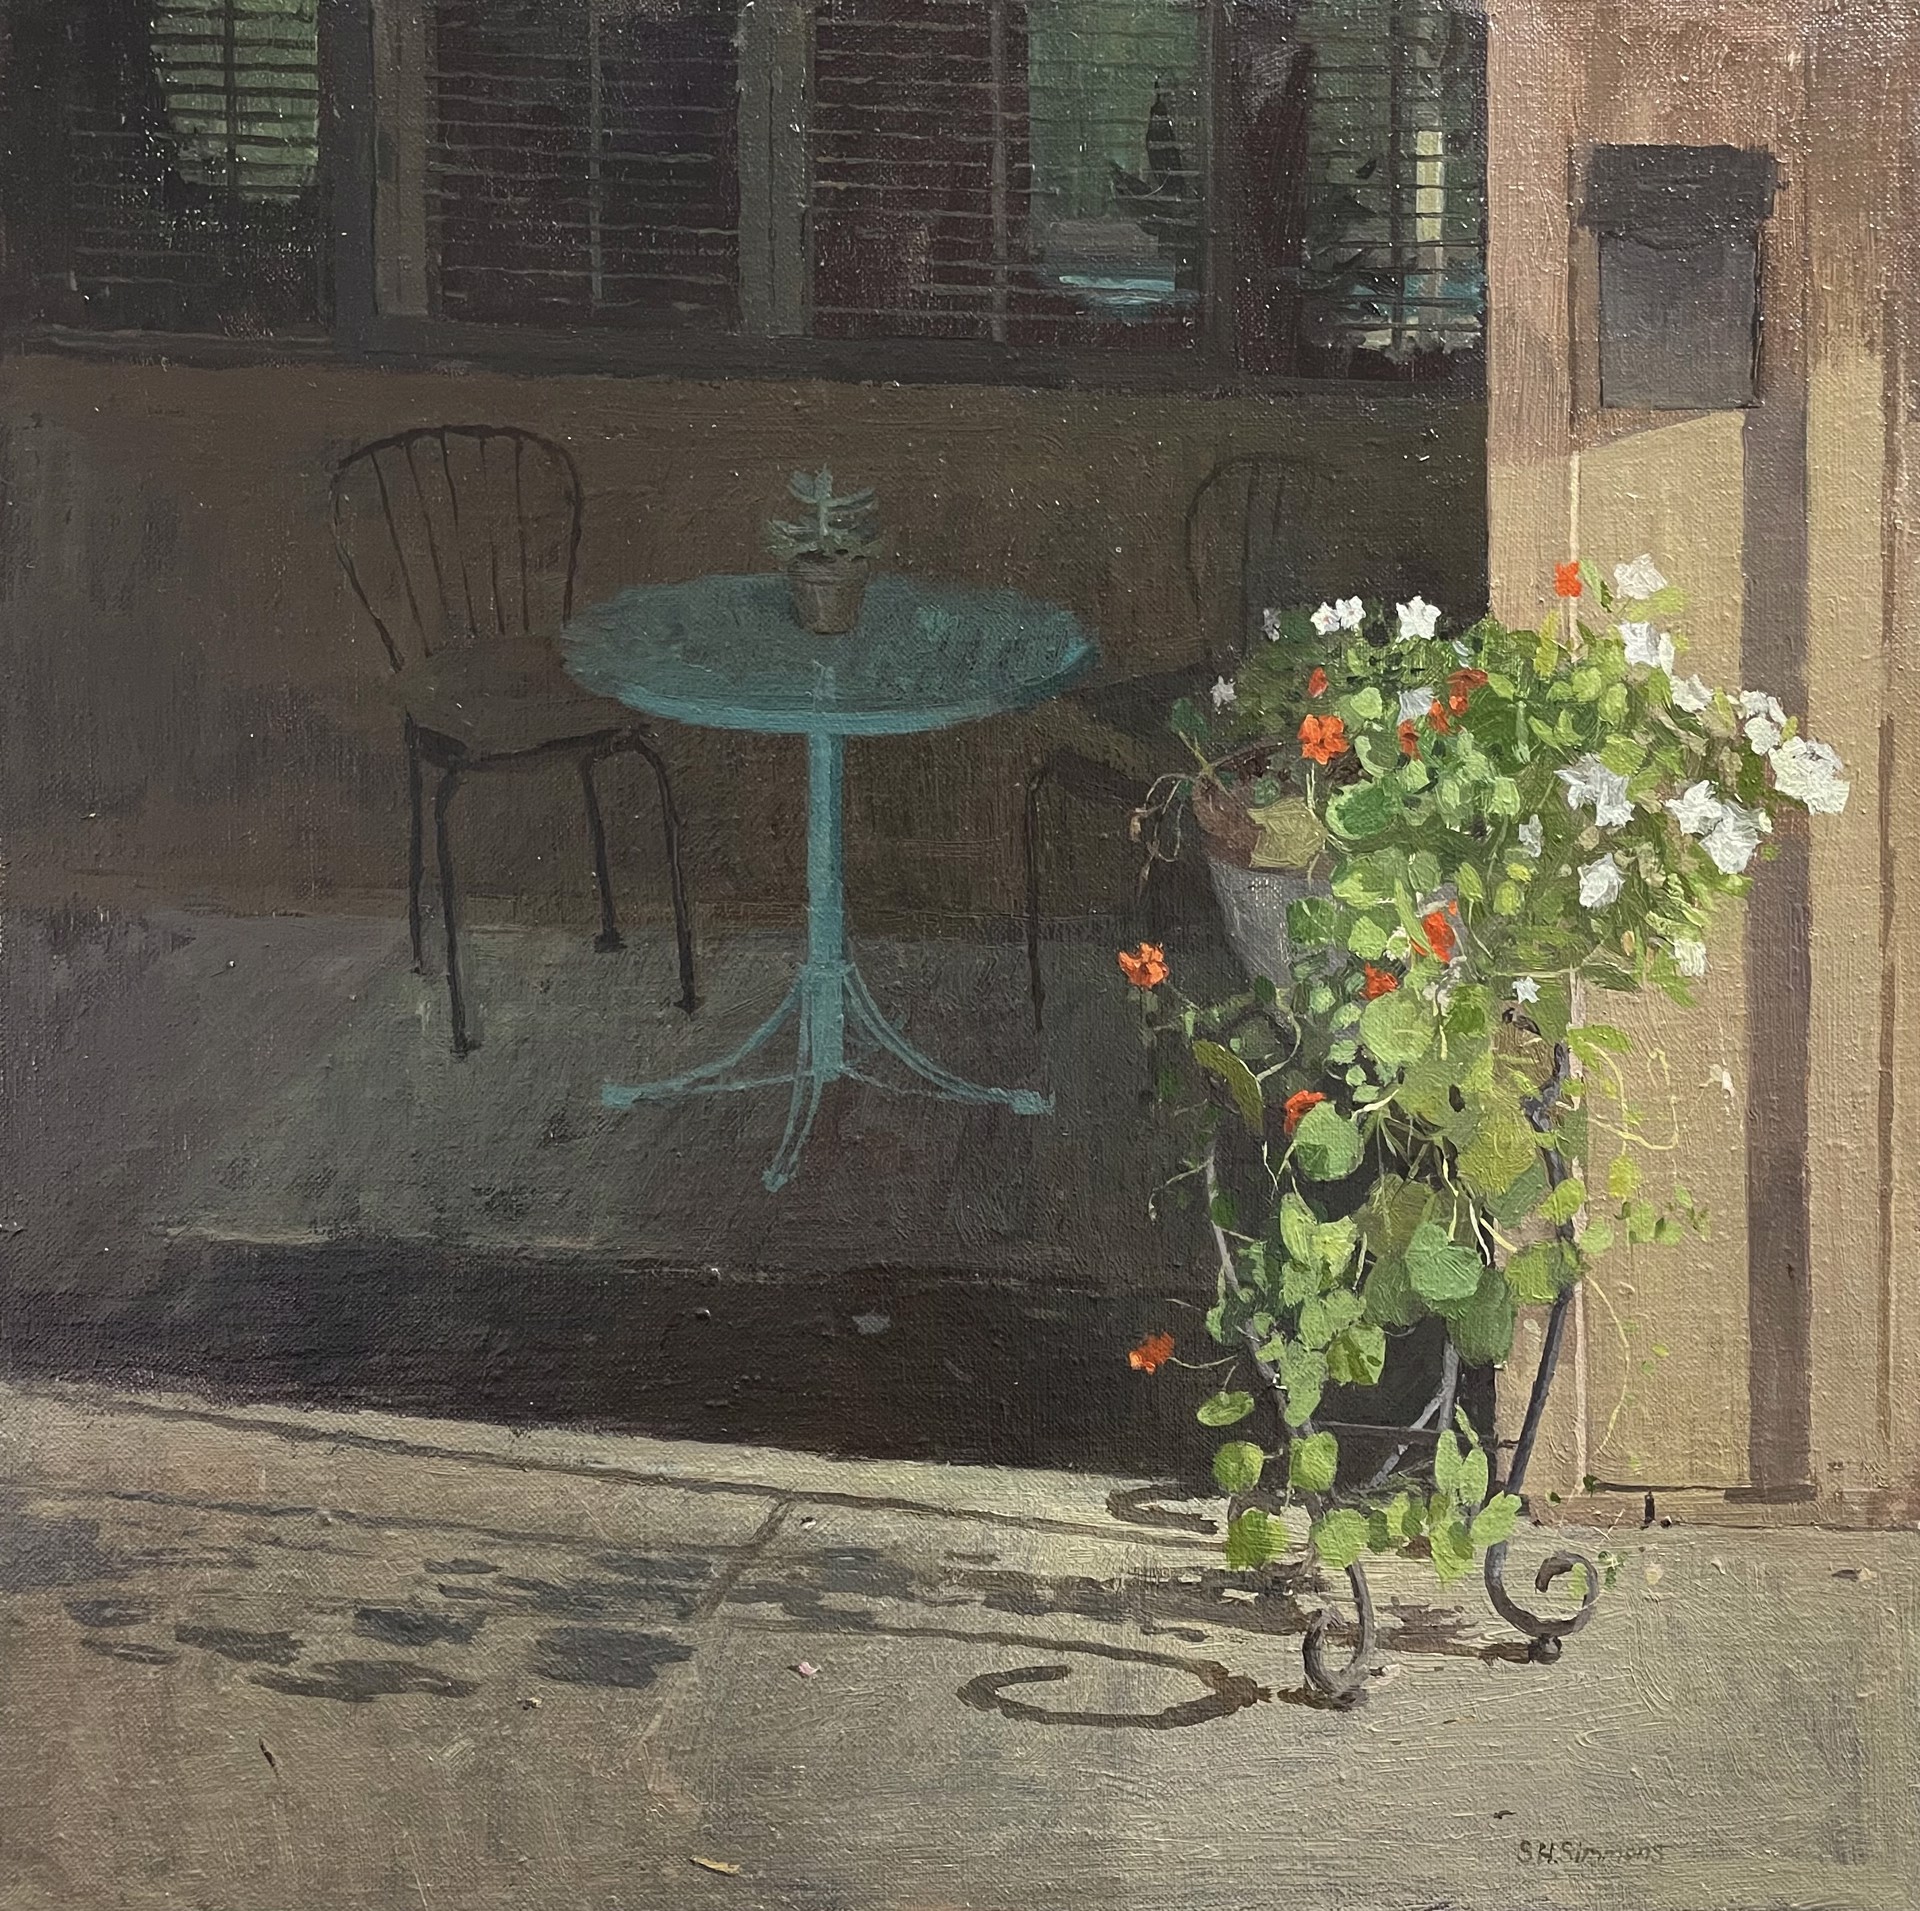 Afternoon Shadows and Blossoms by Spencer Simmons